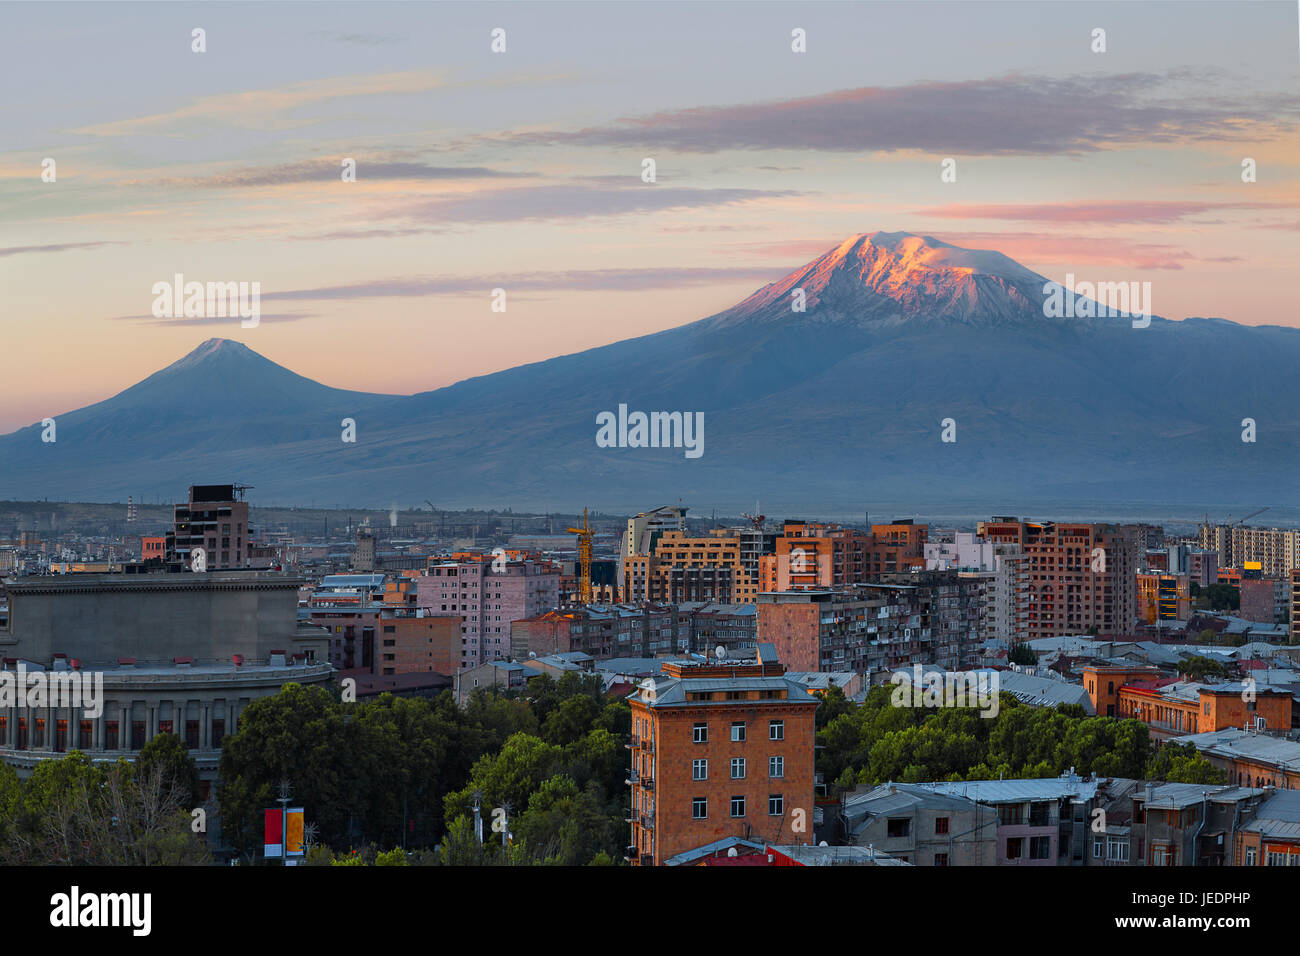 View over Yerevan at the sunrise with the two peaks of the Mt Ararat in the background, Armenia. Stock Photo